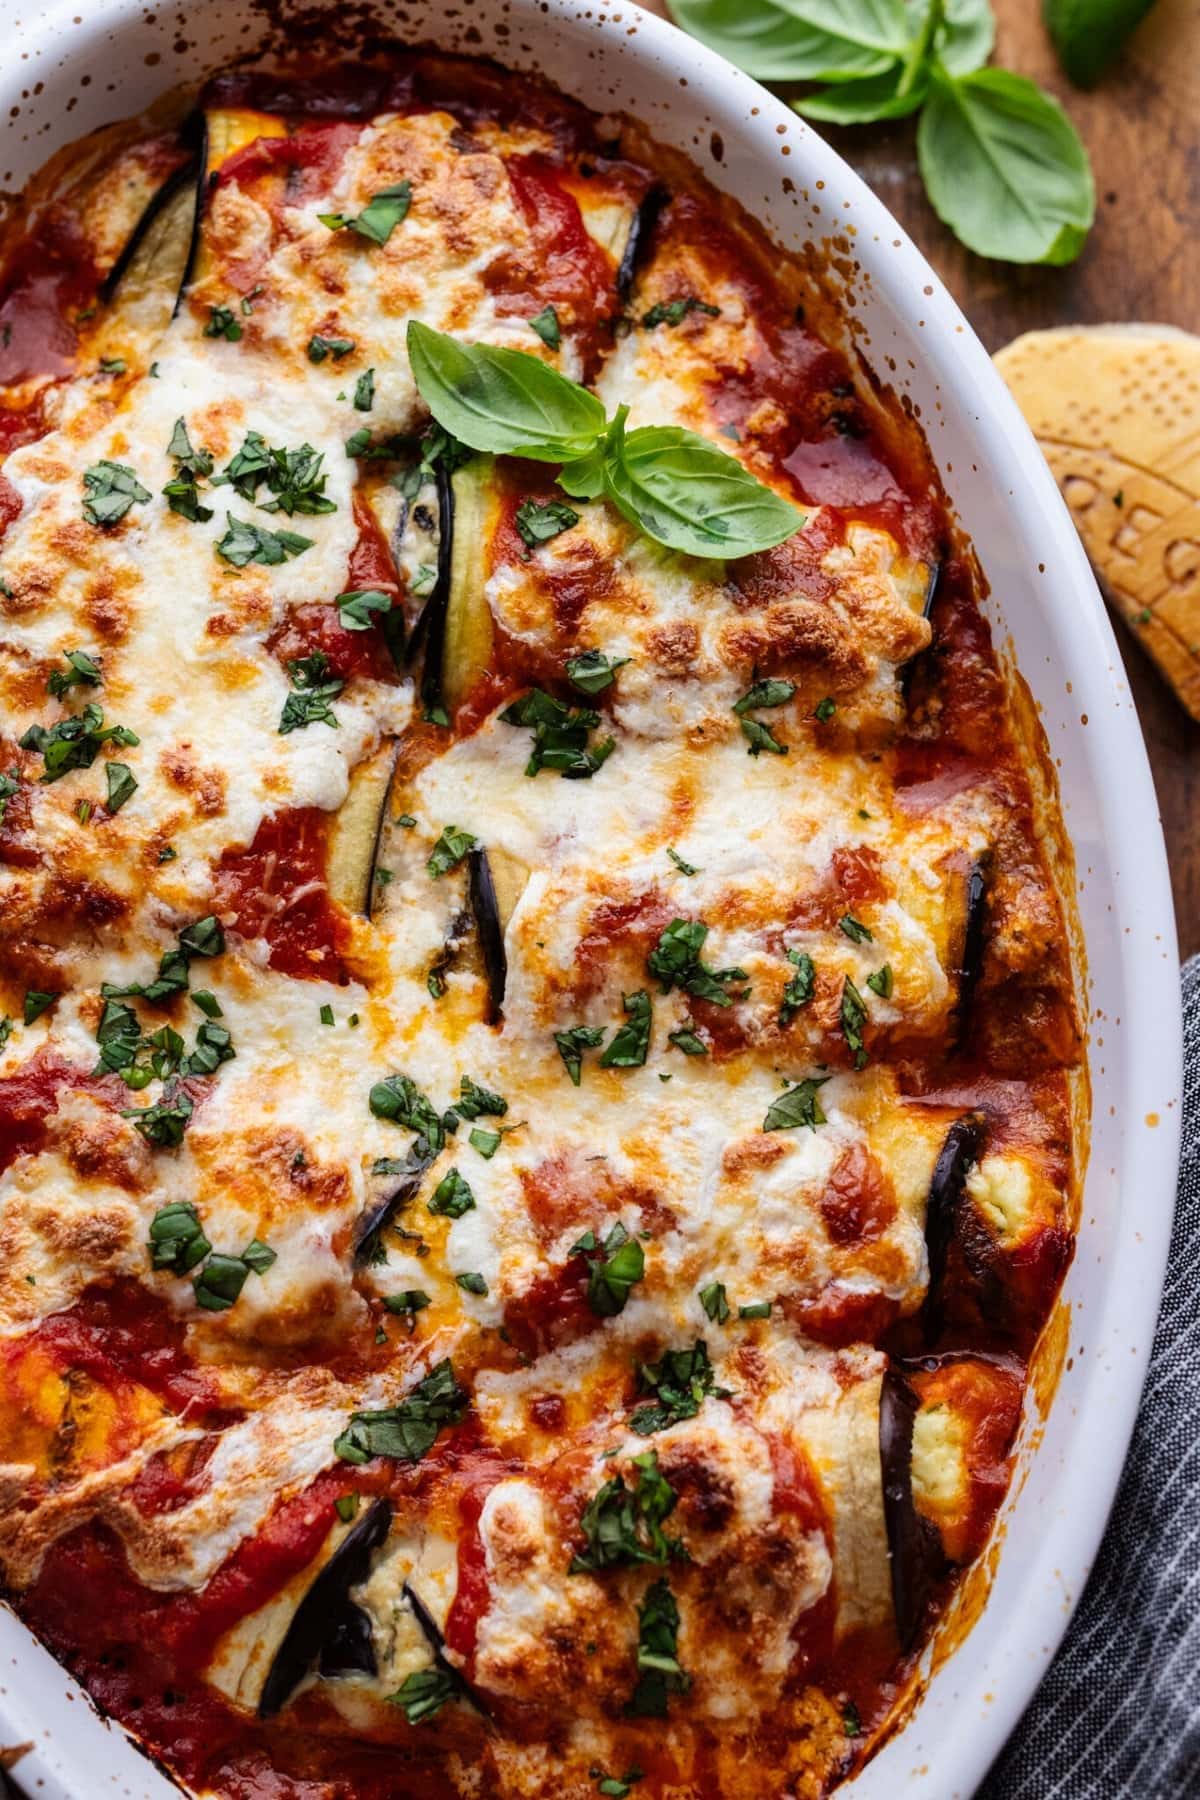 Baked eggplant rollatini in a casserole dish made with thinly sliced eggplant gets rolled up and stuffed with Ricotta, Parmesan, and basil.